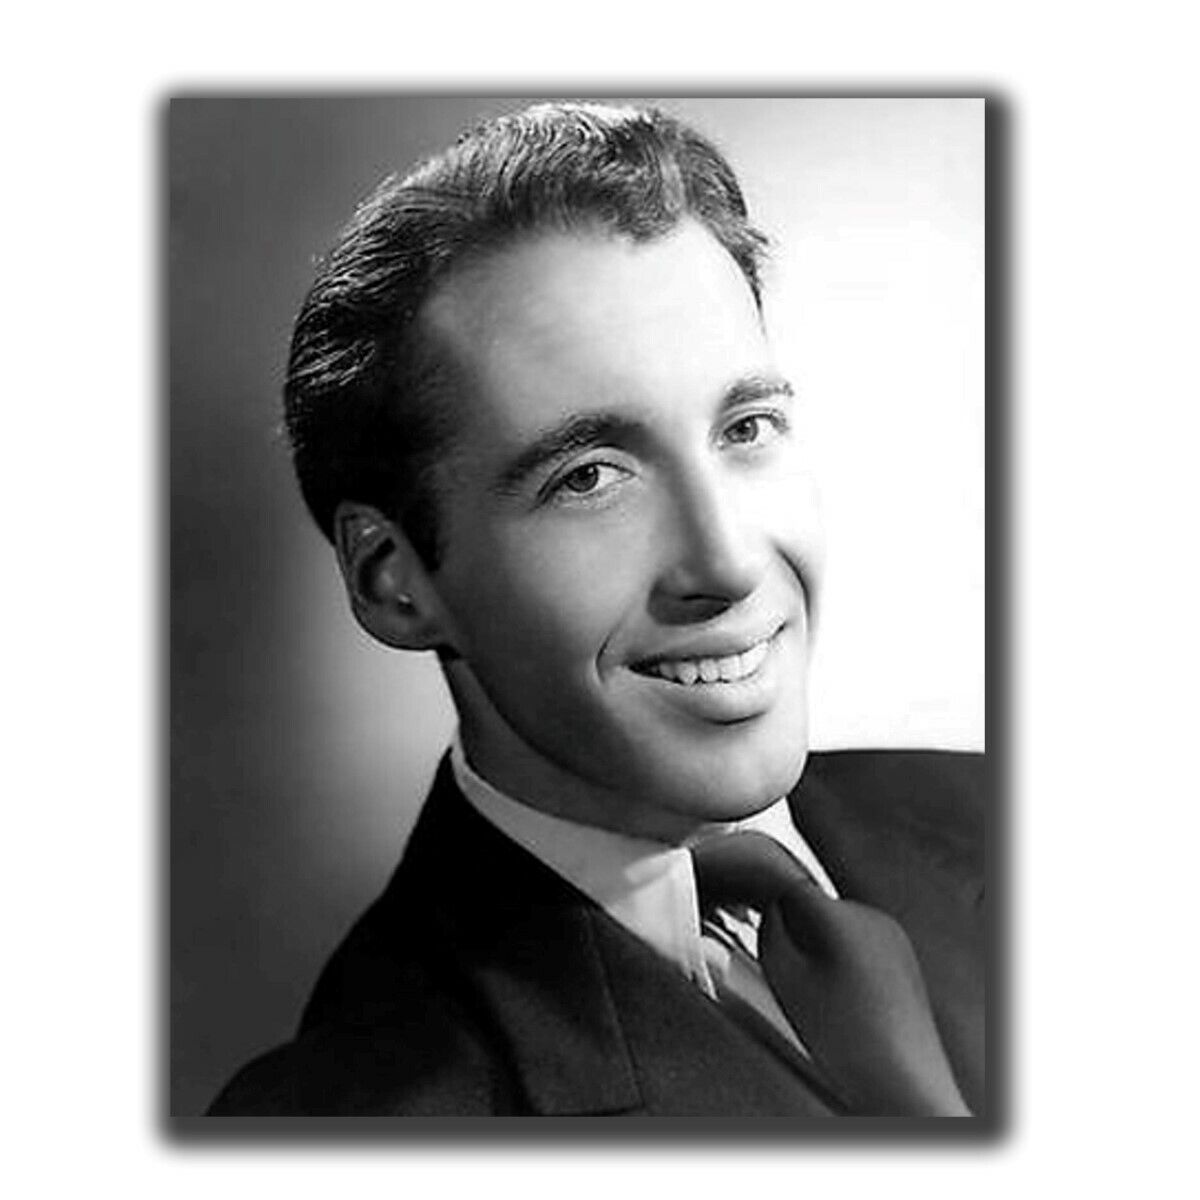 Christopher Lee FINE ART Celebrities Vintage Retro Photo Glossy Size 8X10in G014